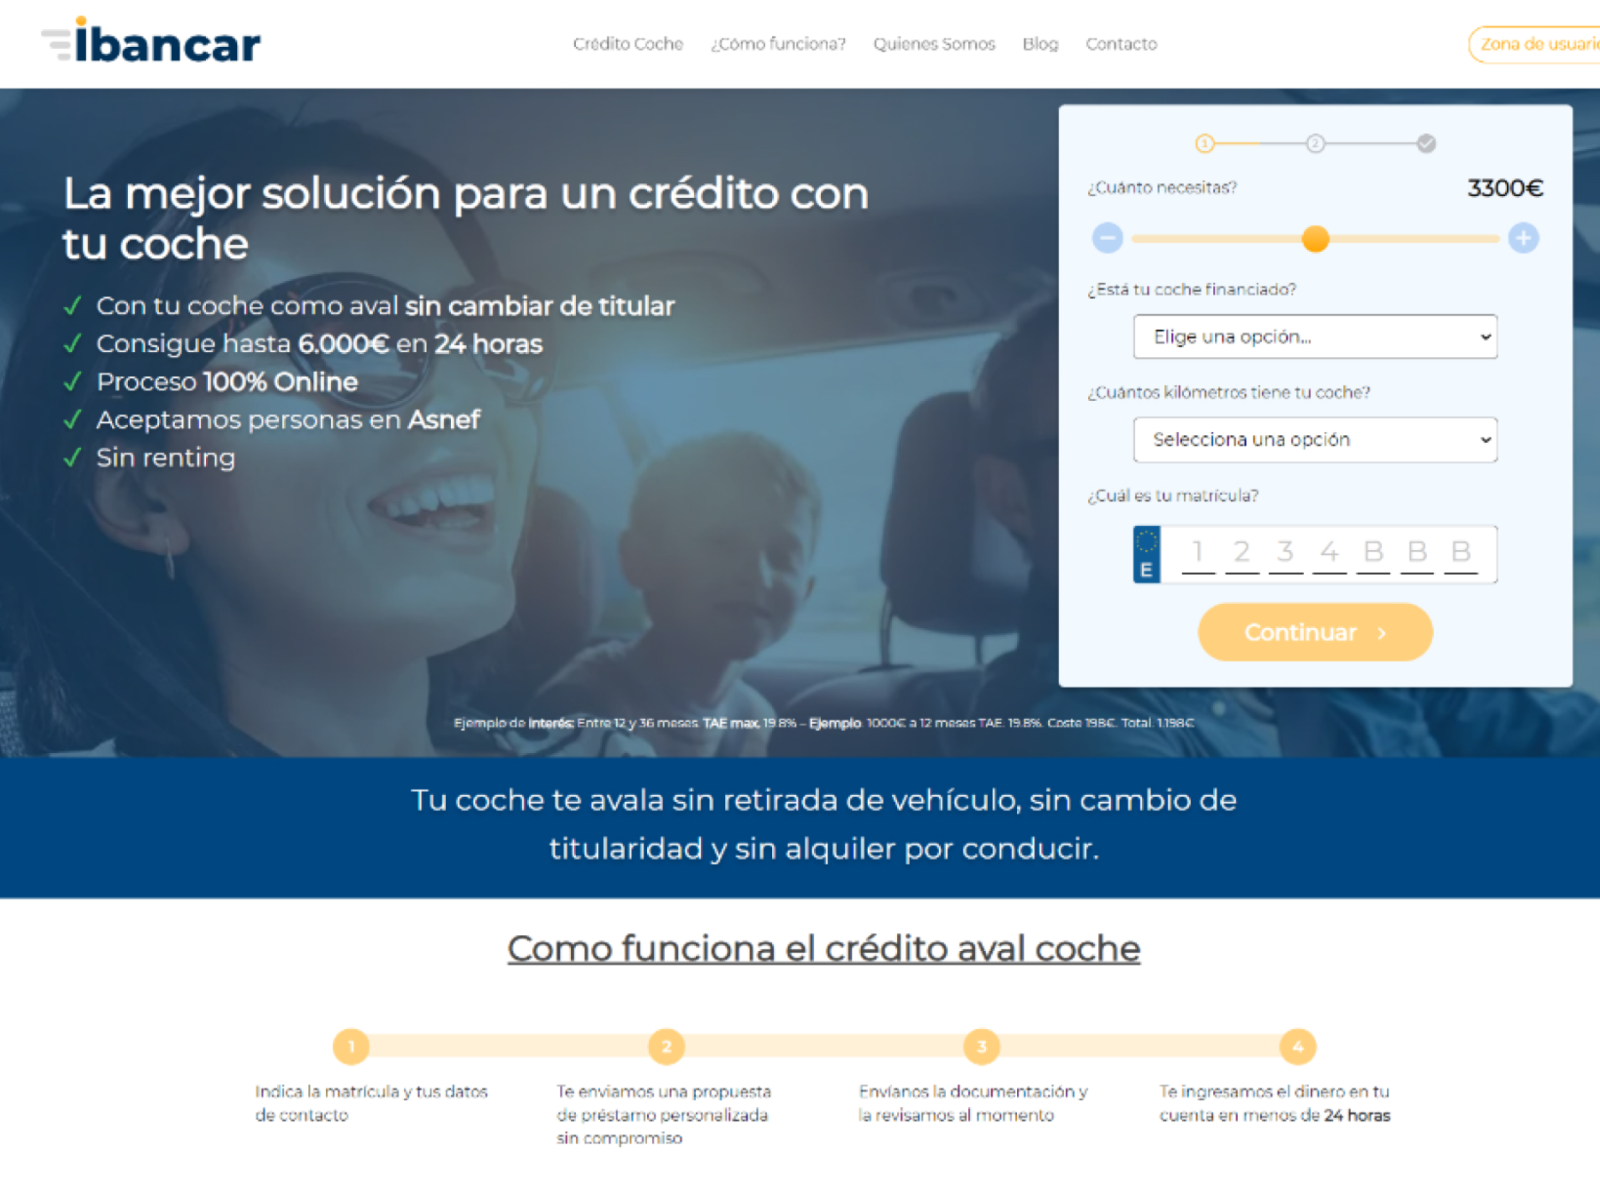 Ibancar redesign by Gaston Pillet on Dribbble